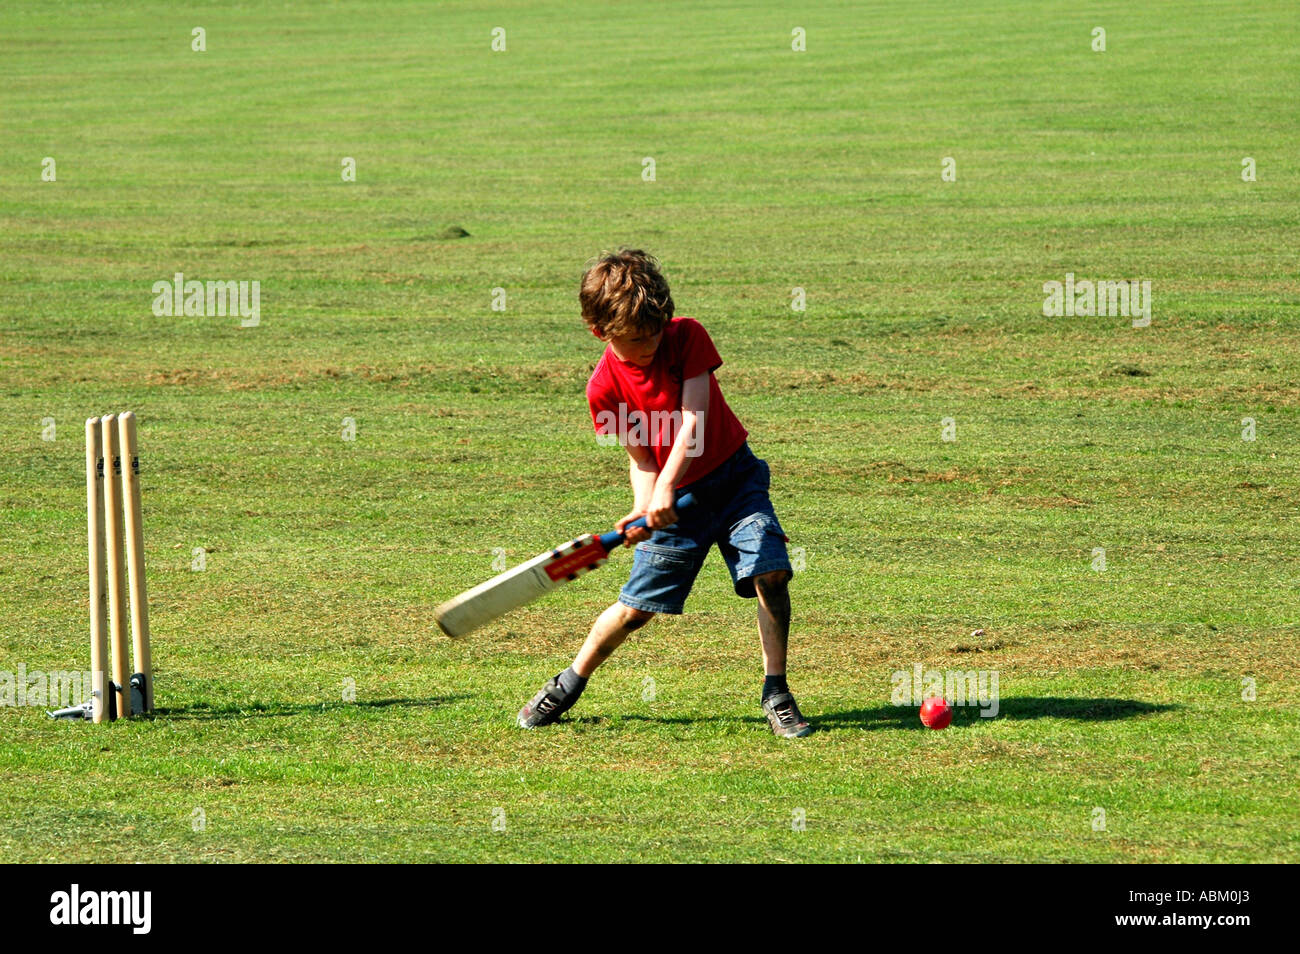 young boy batting in a game of cricket at the park Stock Photo